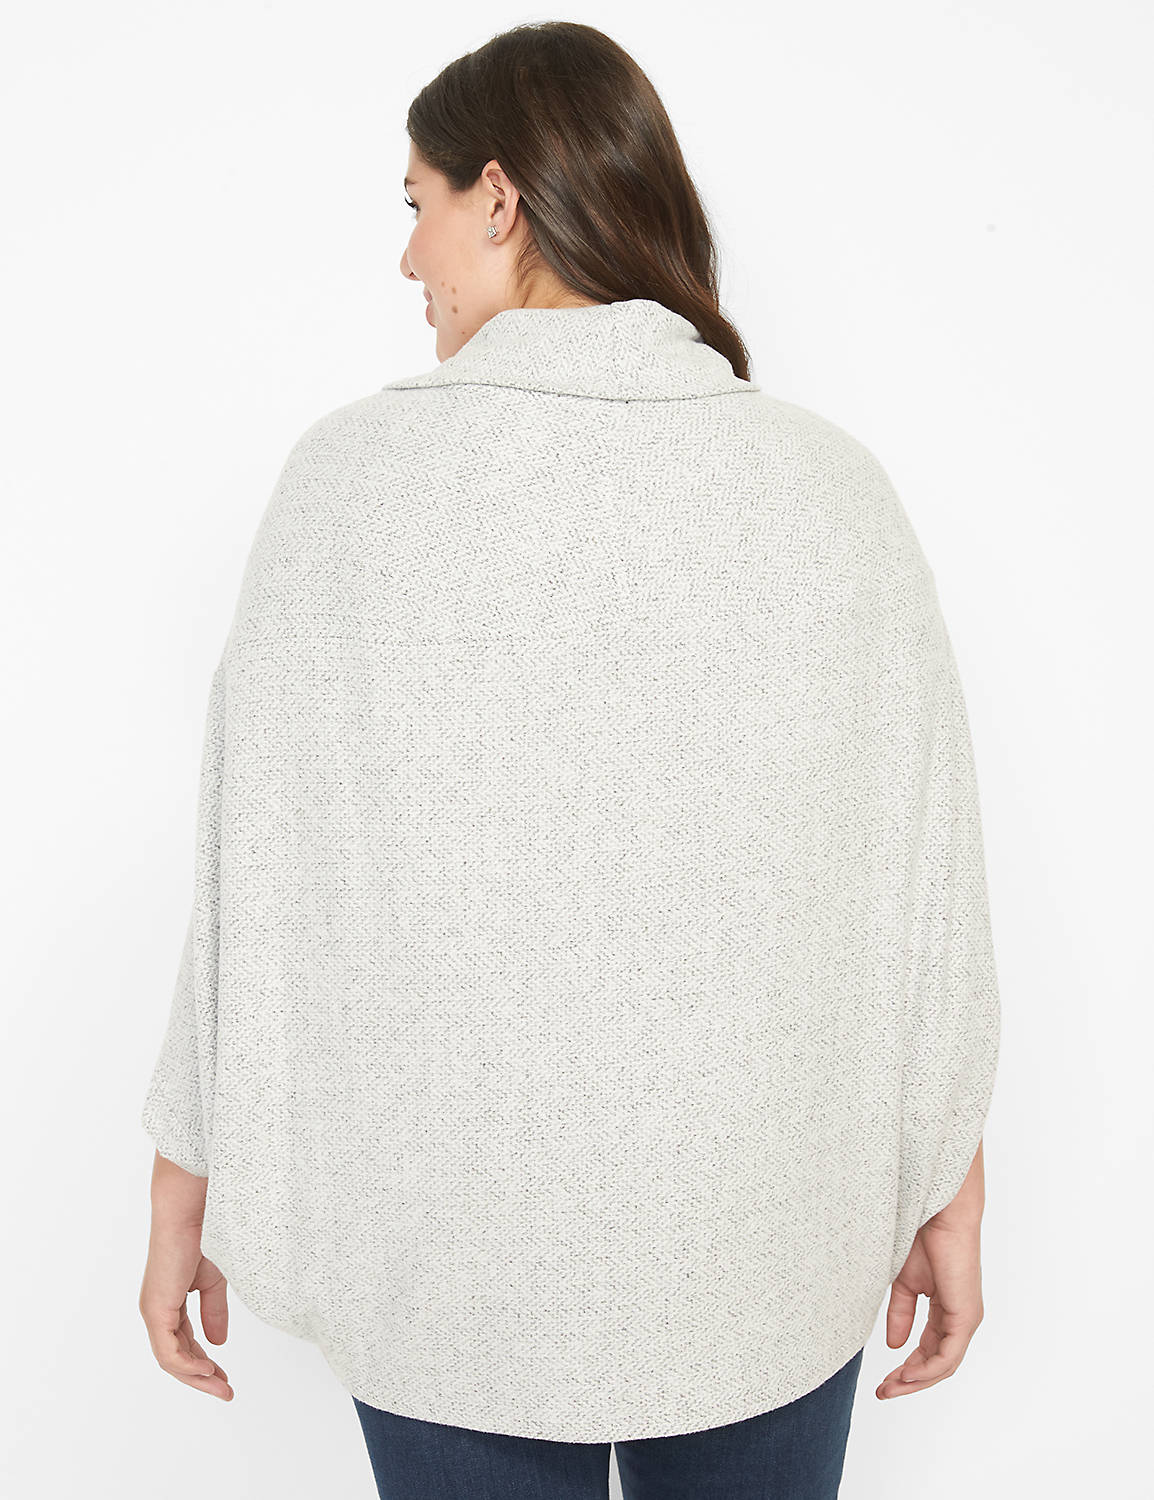 Cowl Neck Poncho In Herringbone Knit 1124661:Grey:22/24 Product Image 2